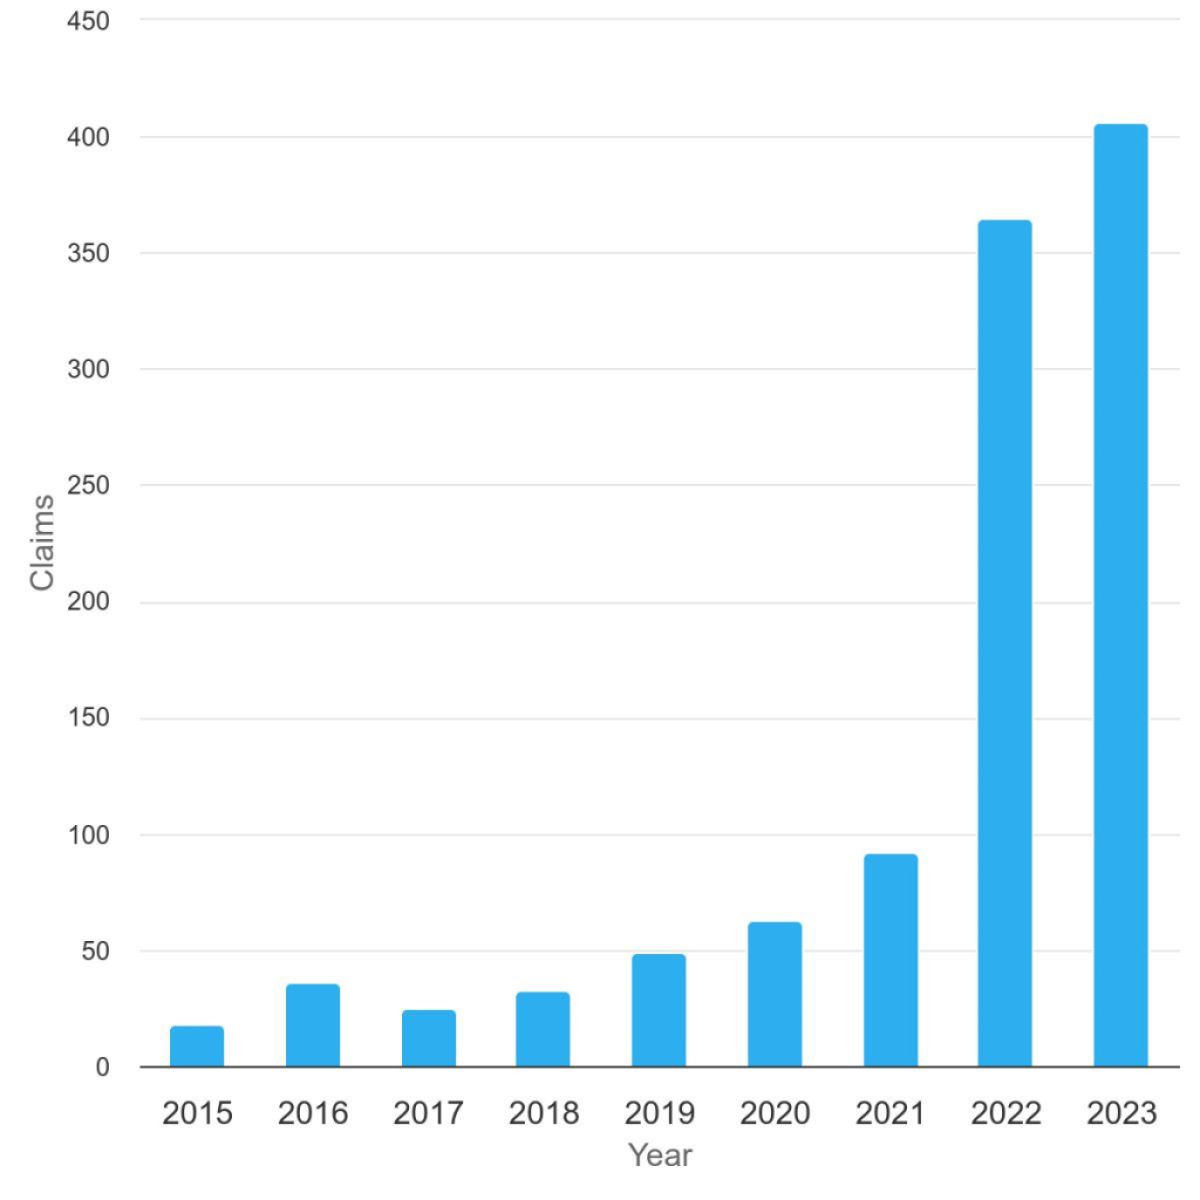 Bar chart showing the number of DMCA notices that allege circumvention annually from 2015 to 2023, displaying a significant increase in 2022 and 2023 compared to 2015 to 2021.